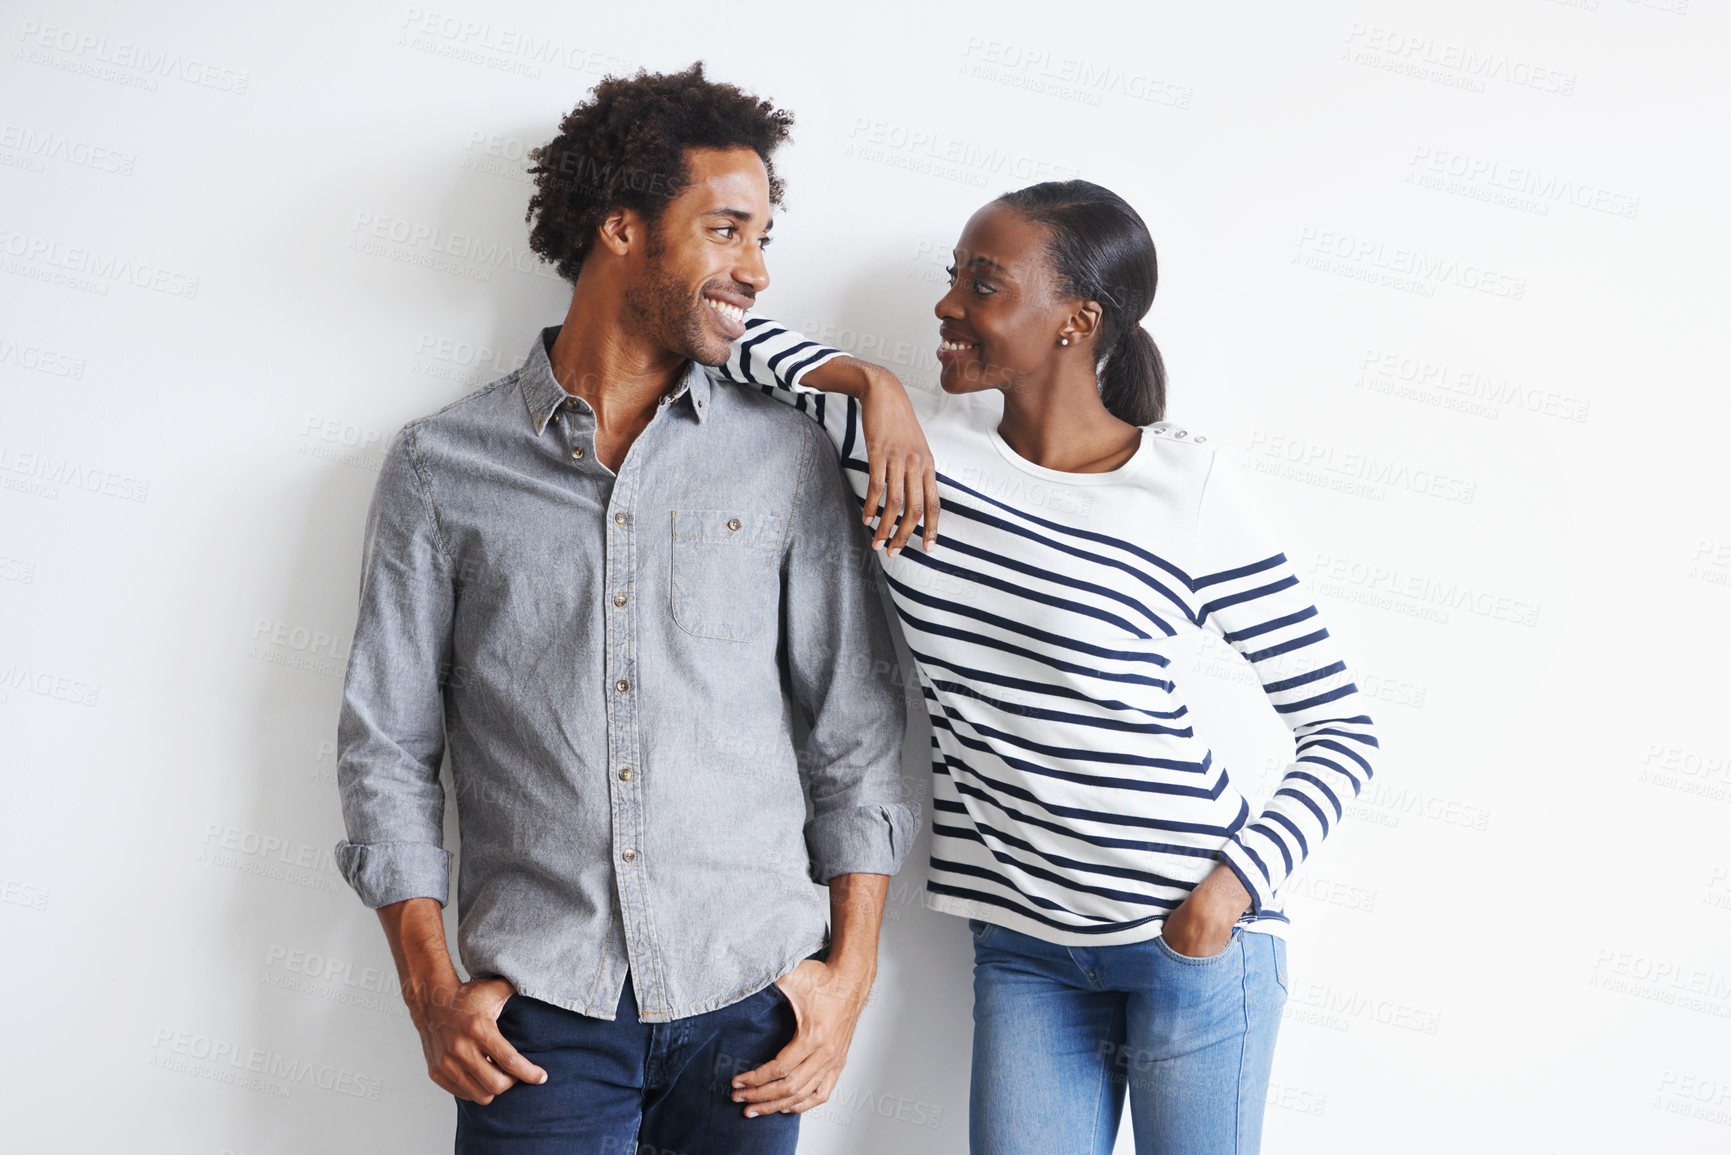 Buy stock photo A happy young couple standing together affectionately against a white wall